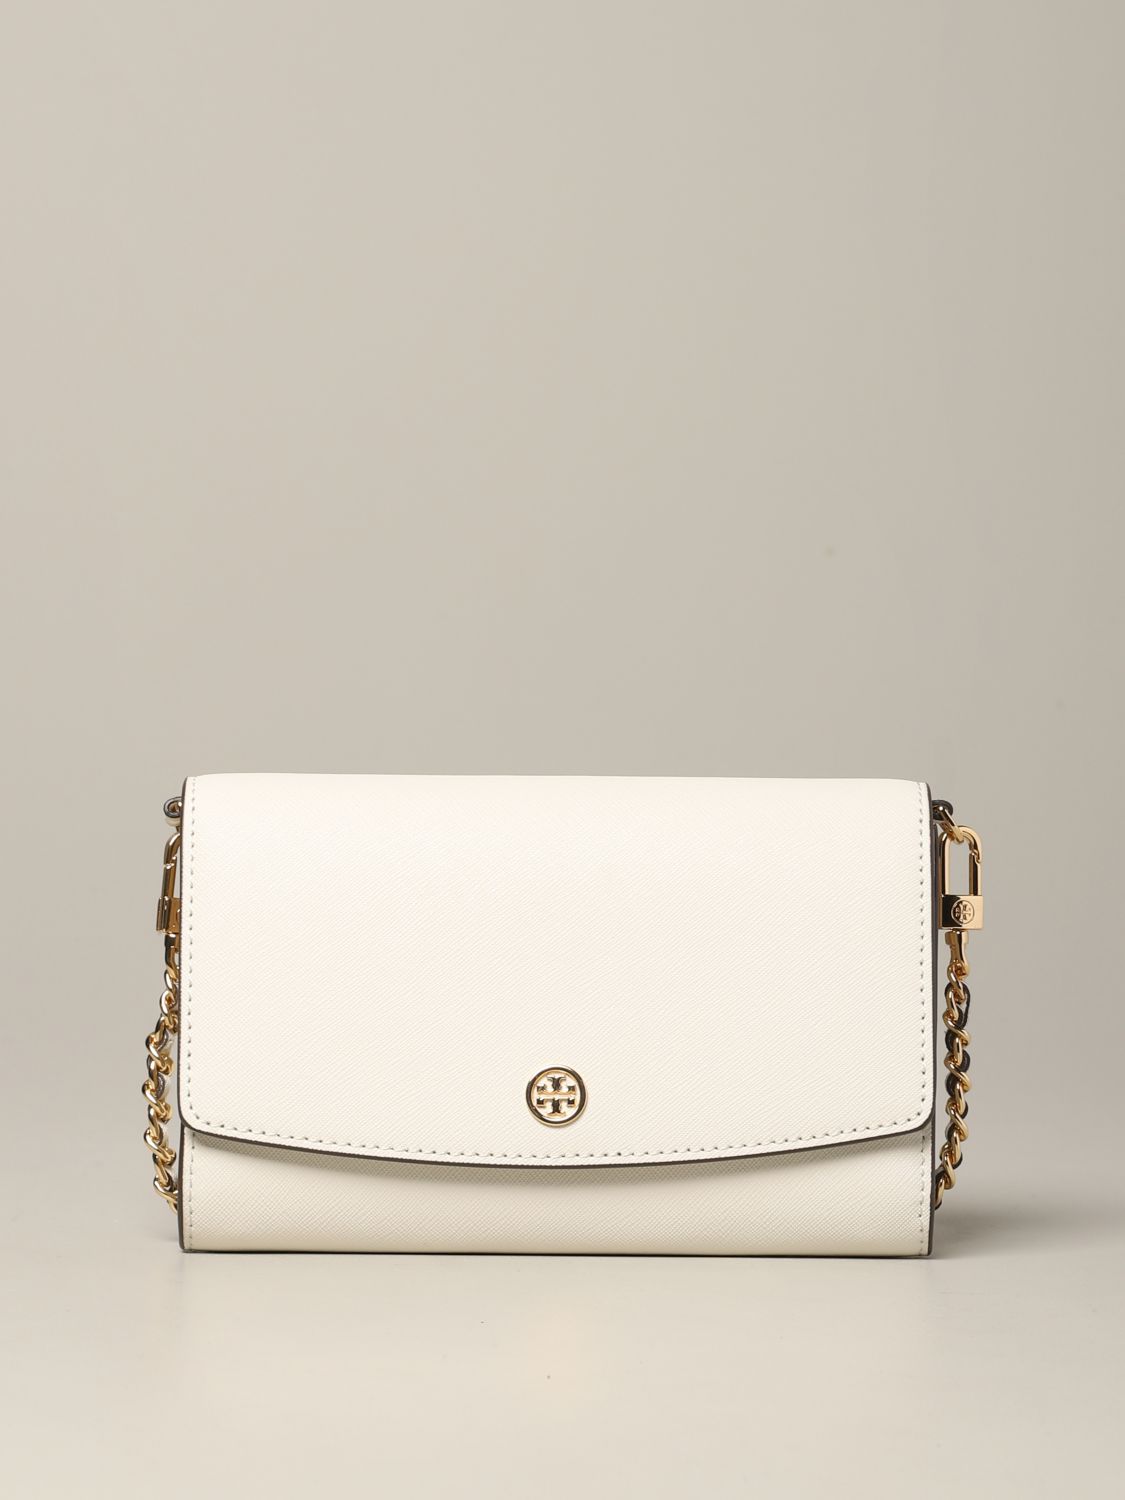 Tory Burch Outlet: Robinson chain wallet shoulder bag - White | Tory Burch  mini bag 54277 online on 